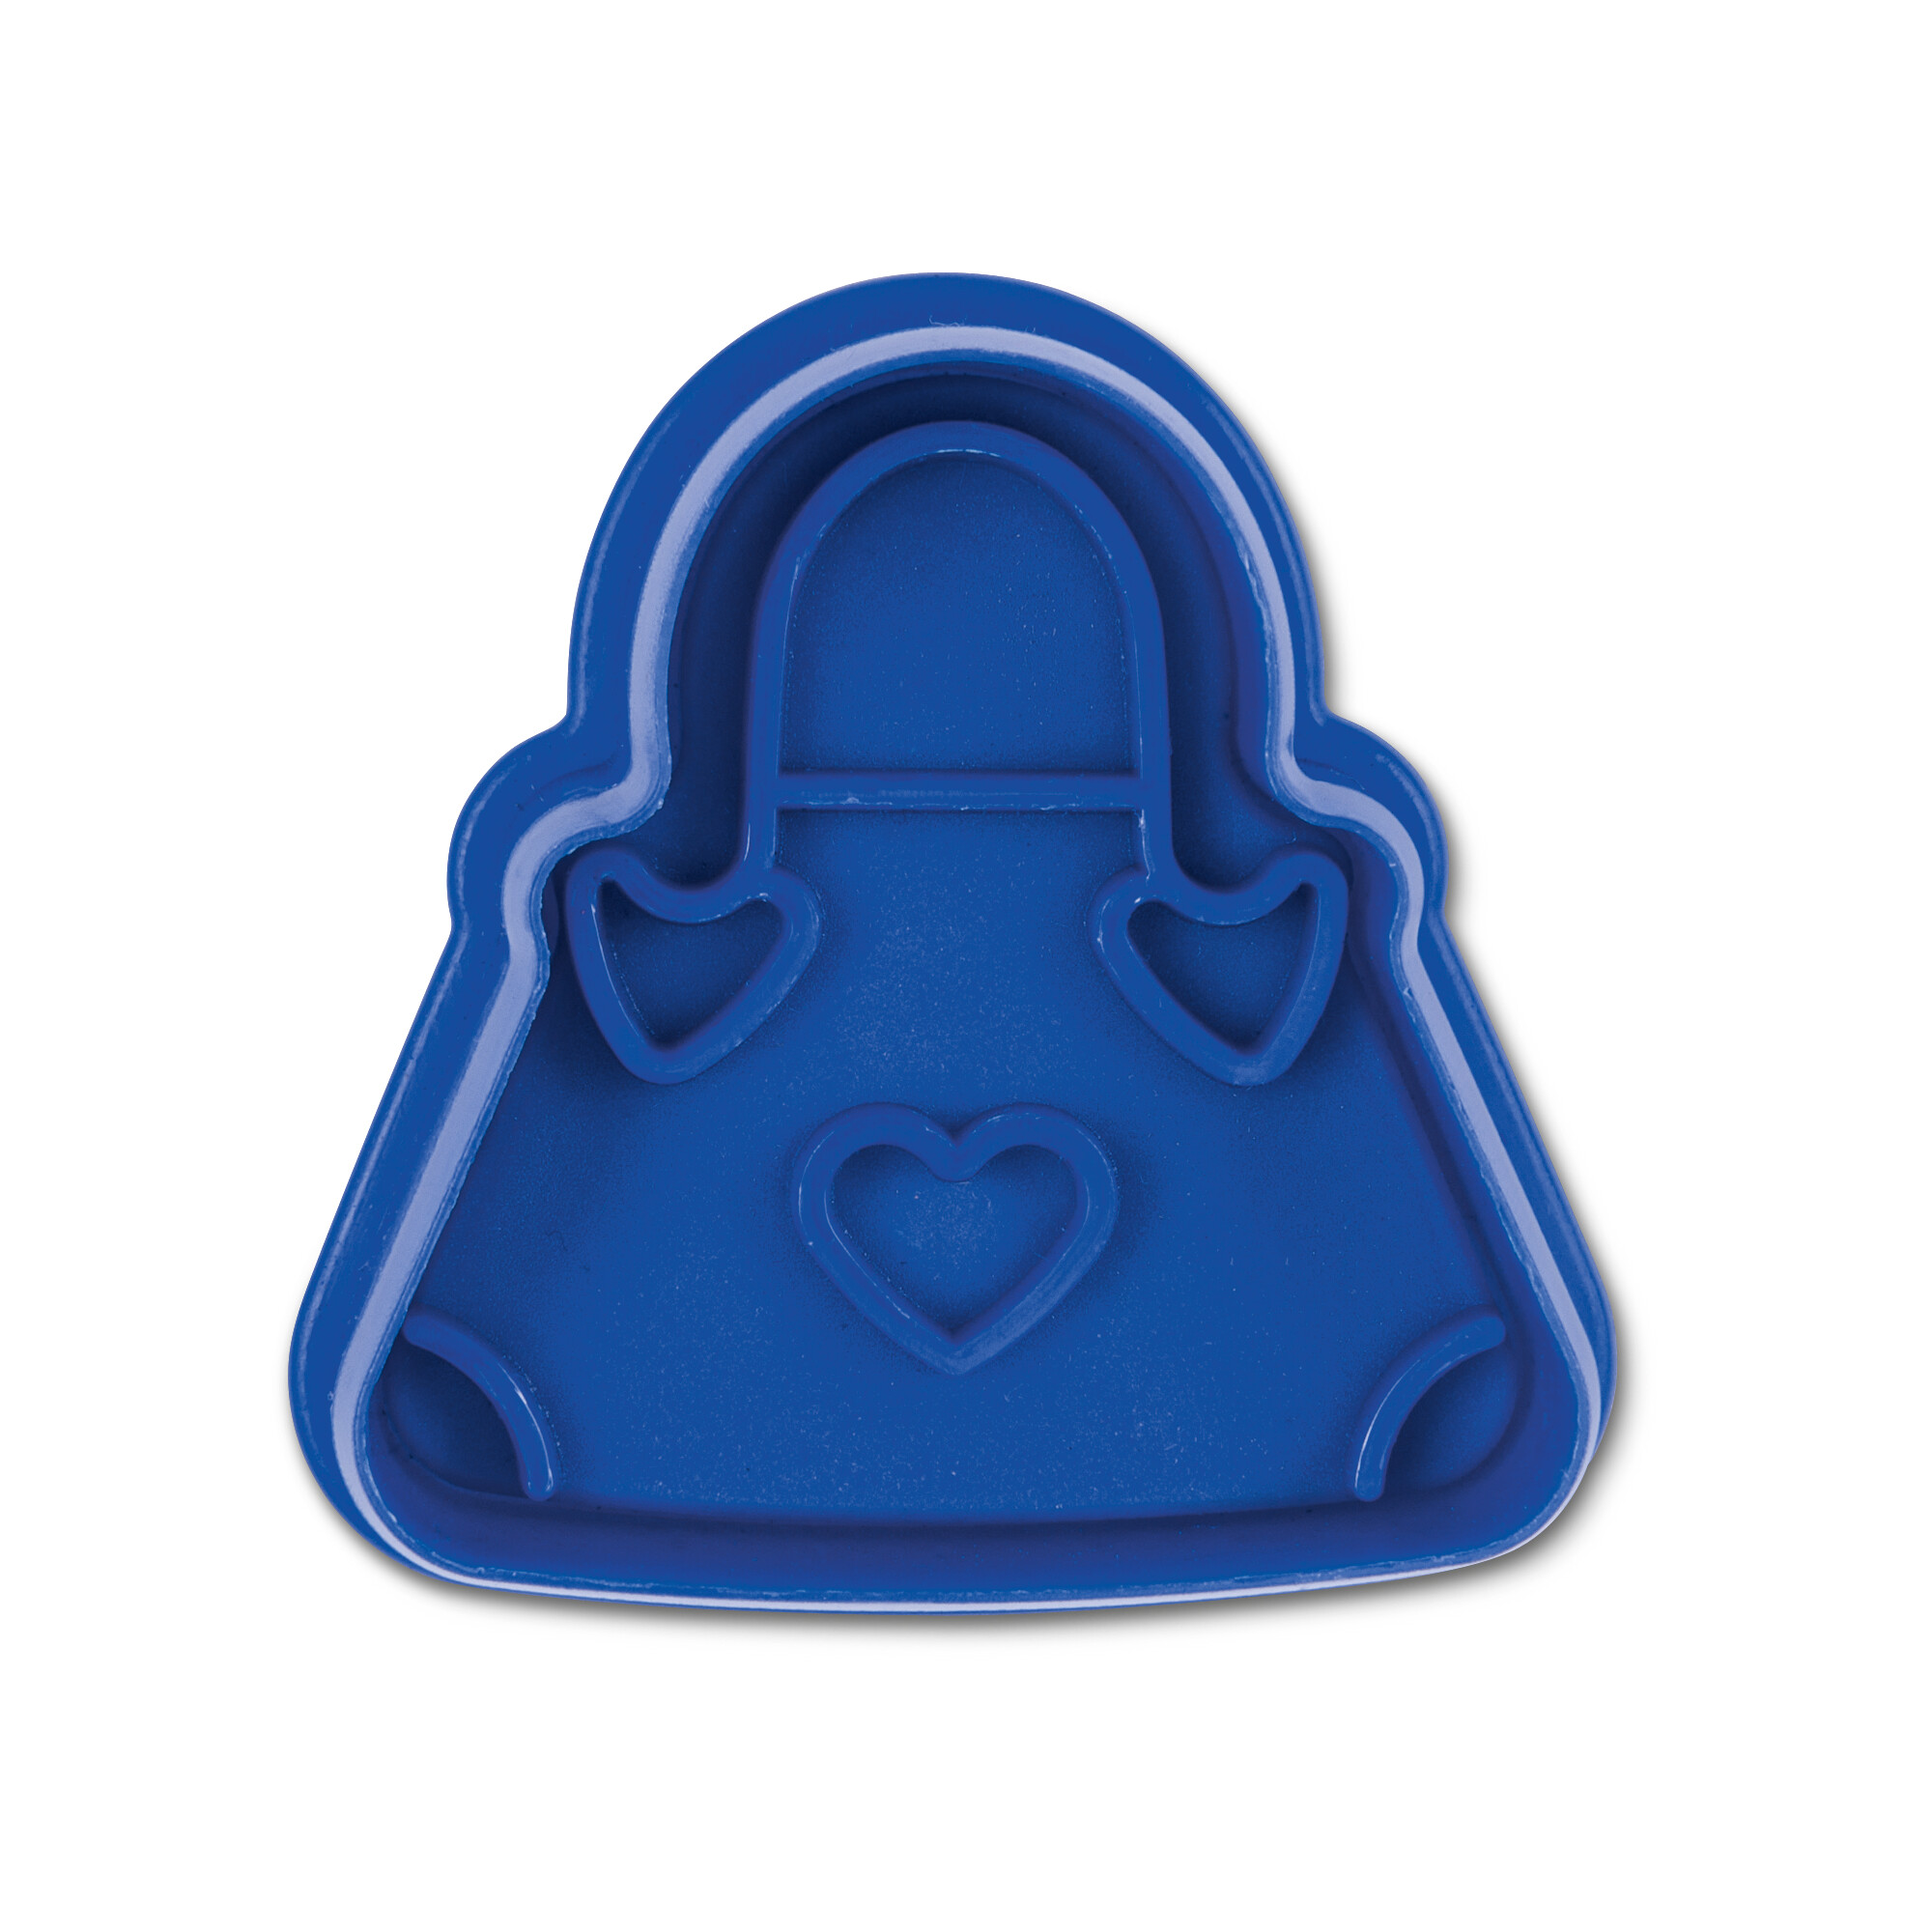 Cookie cutter with stamp and ejector – Handbag